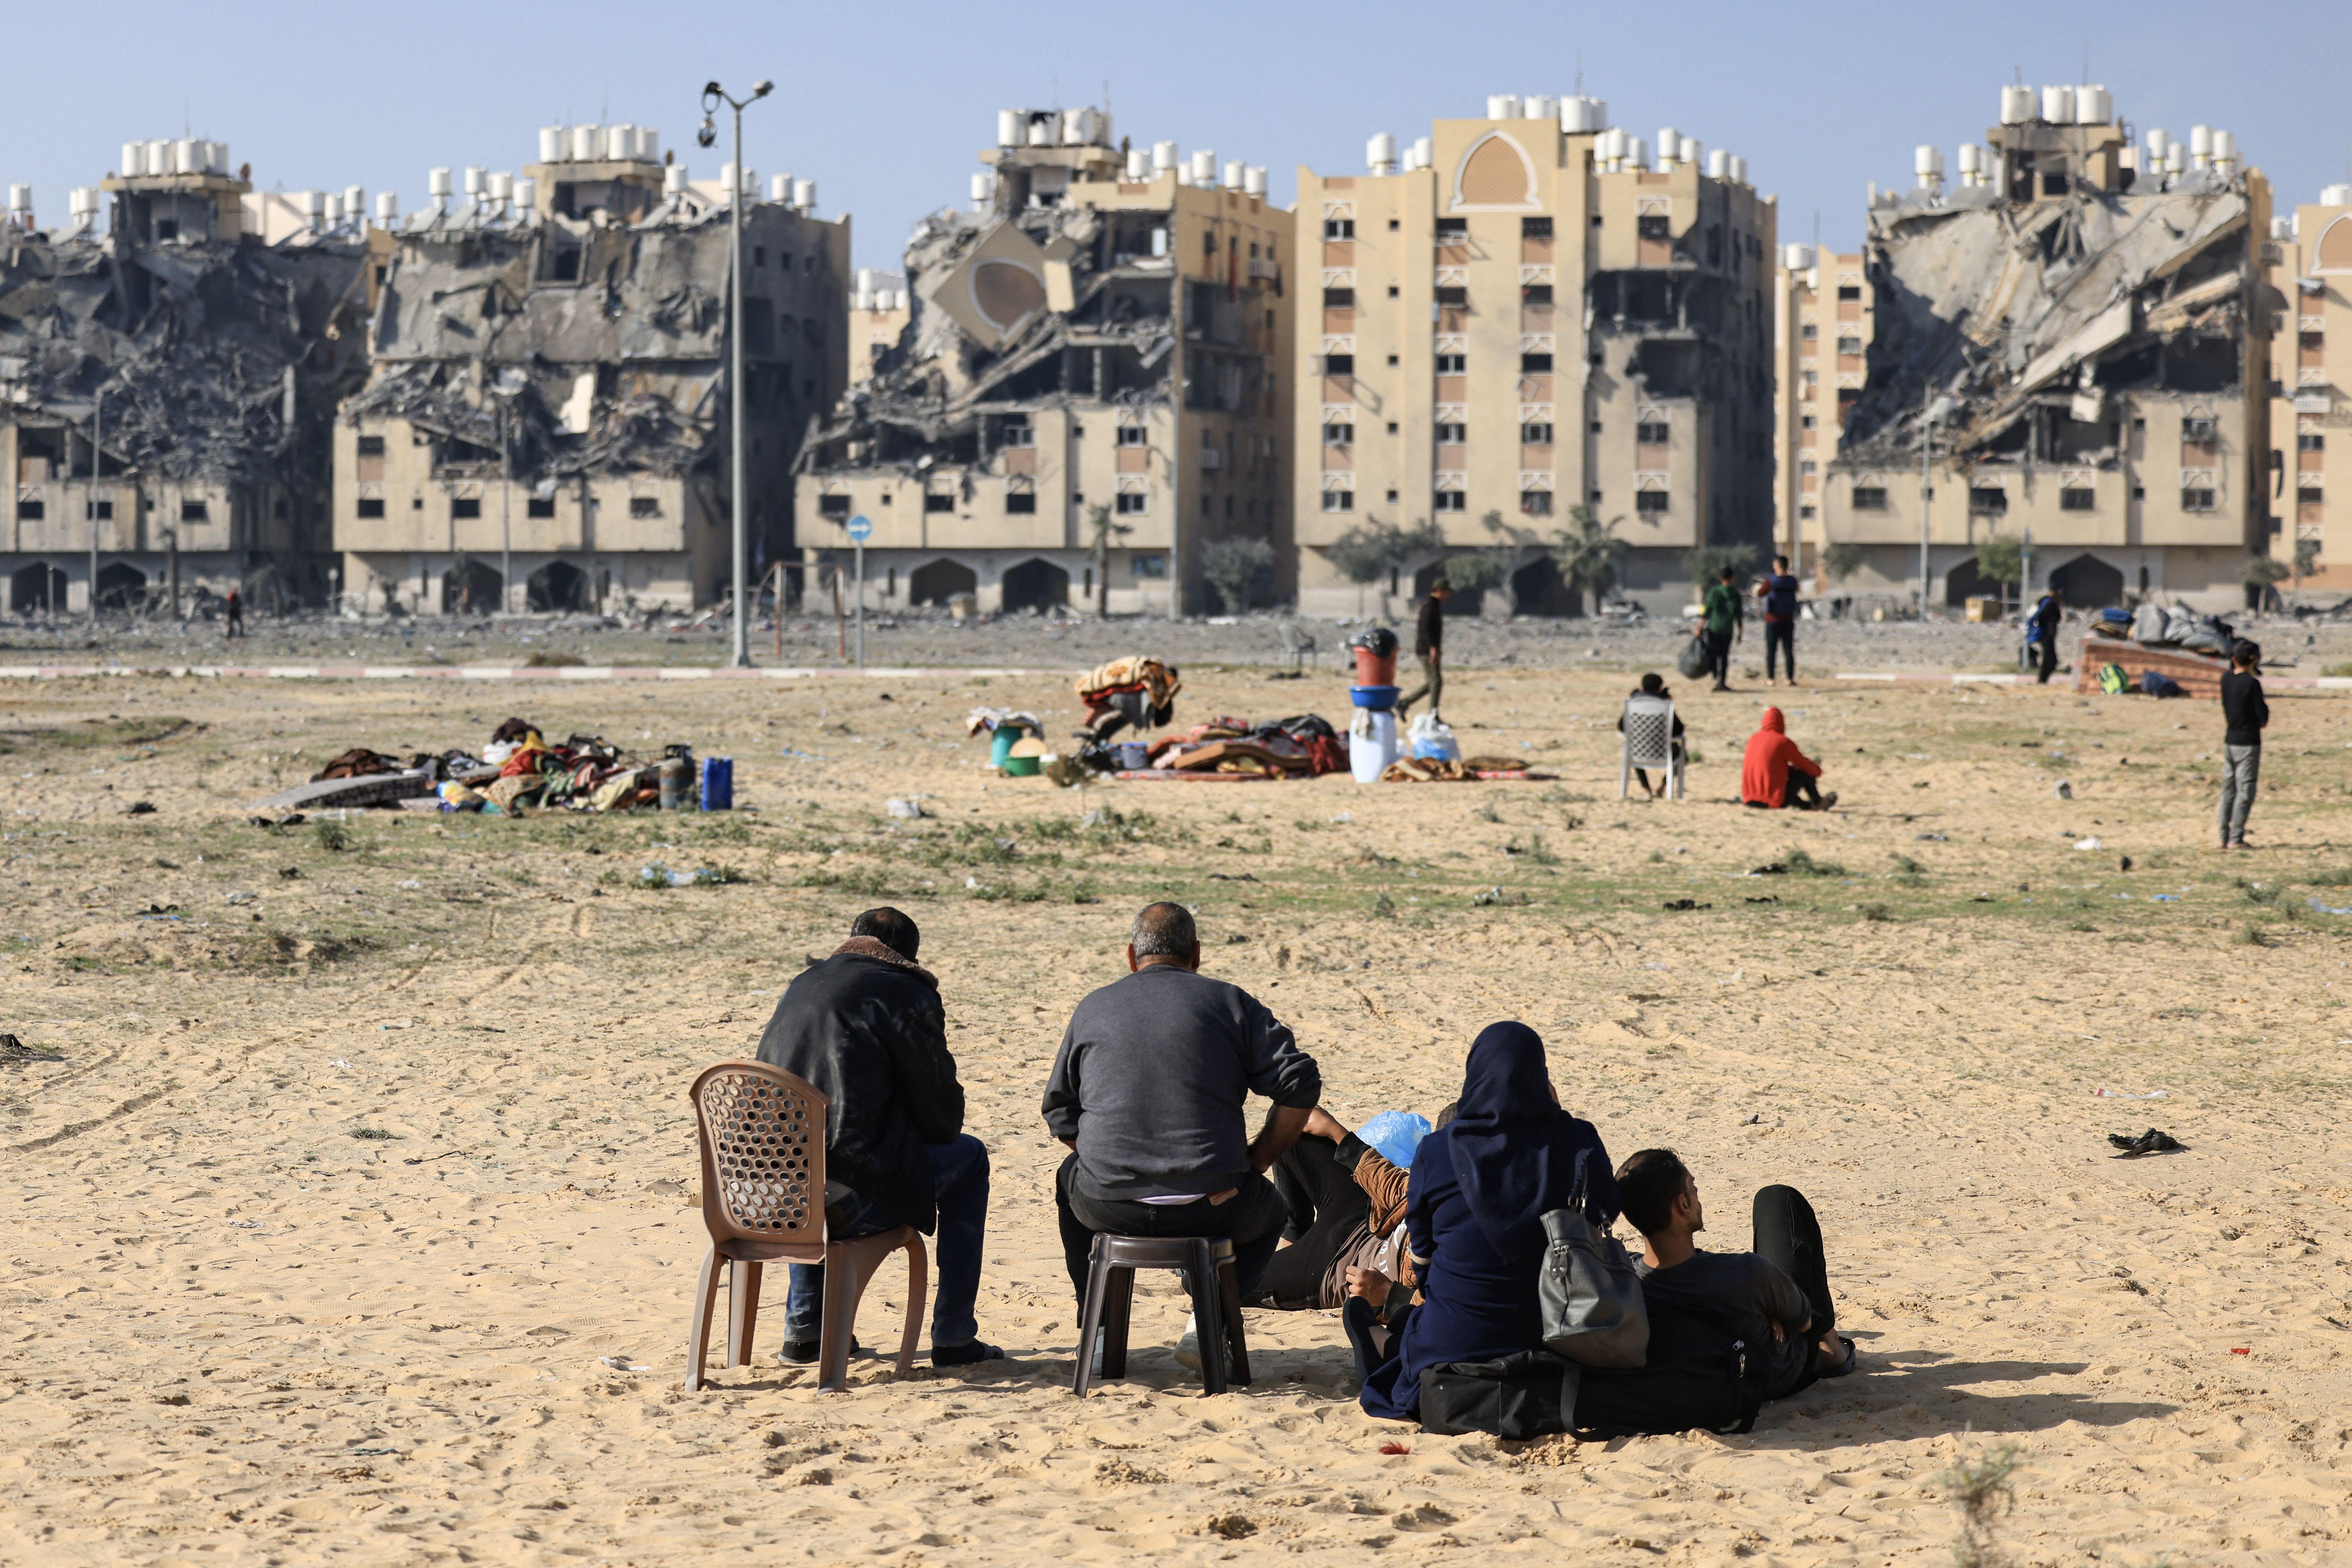 Residents sit in the foreground with their belongings and their backs turned to the camera. In the background are destroyed residential buildings.